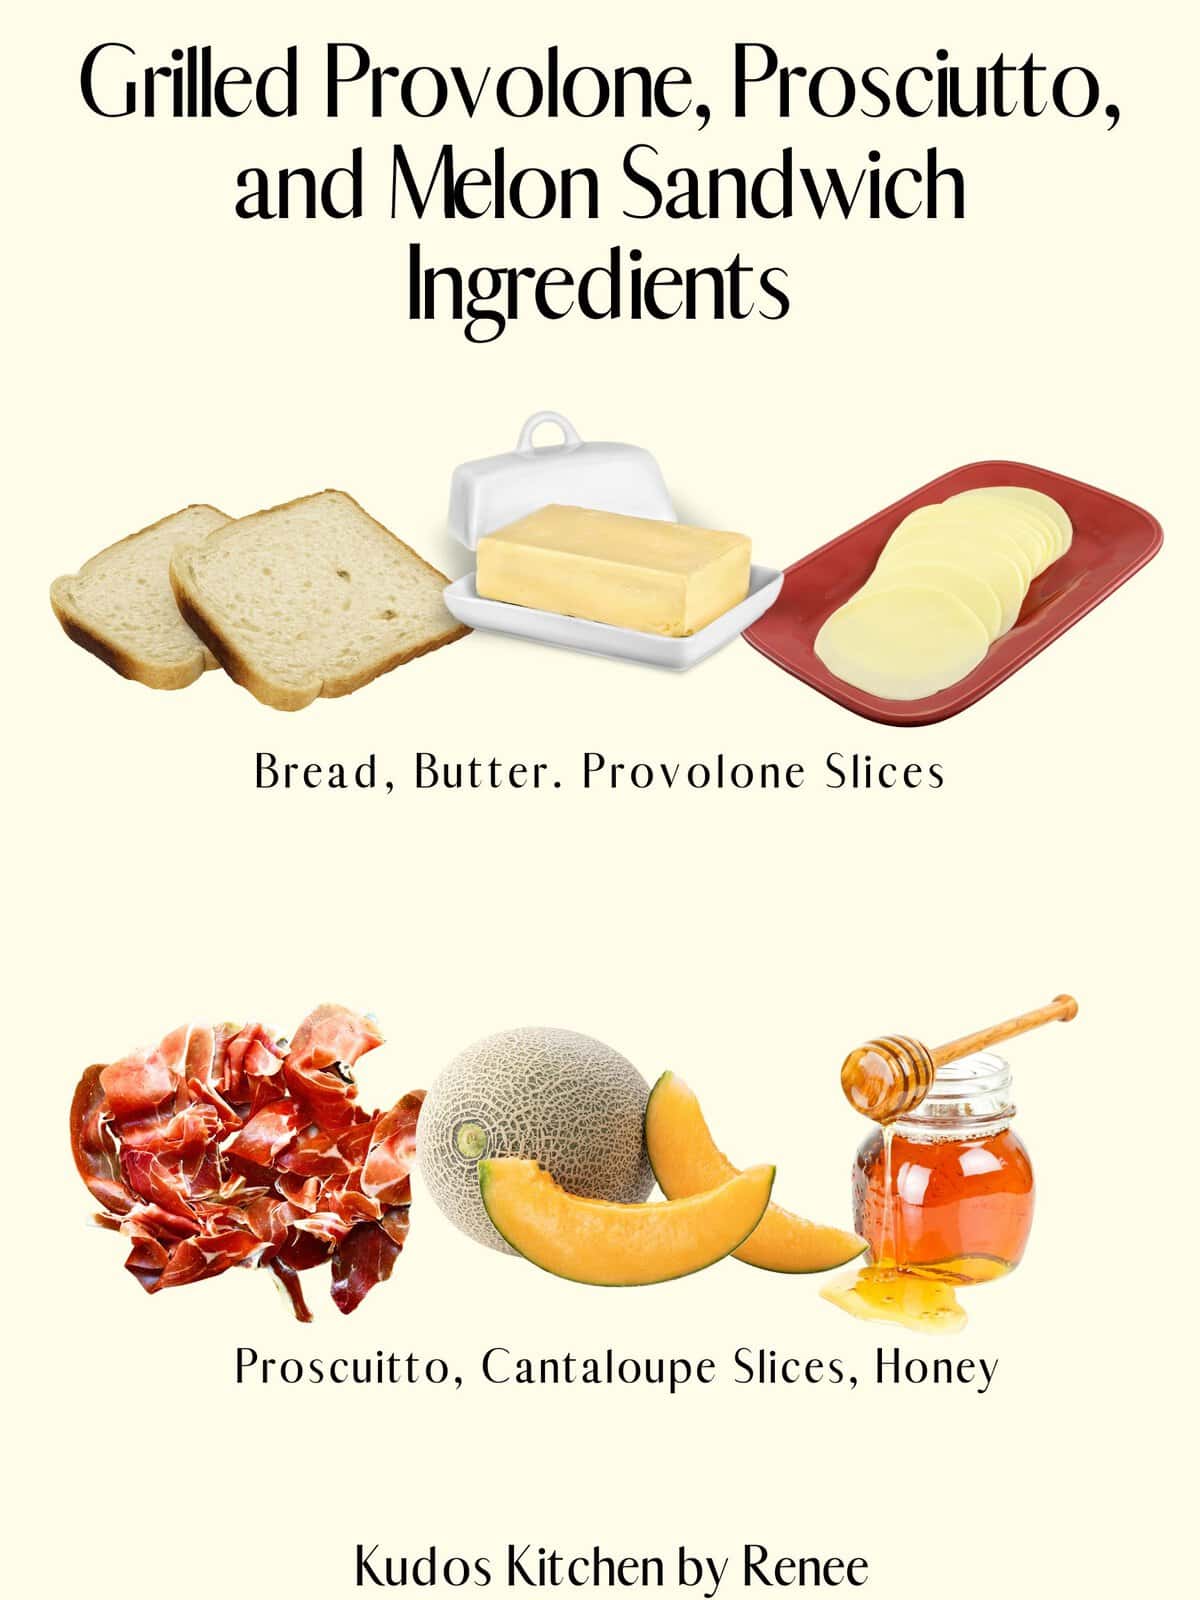 A visual ingredient list for making Grilled Provolone, Prosciutto, and Melon Sandwiches.